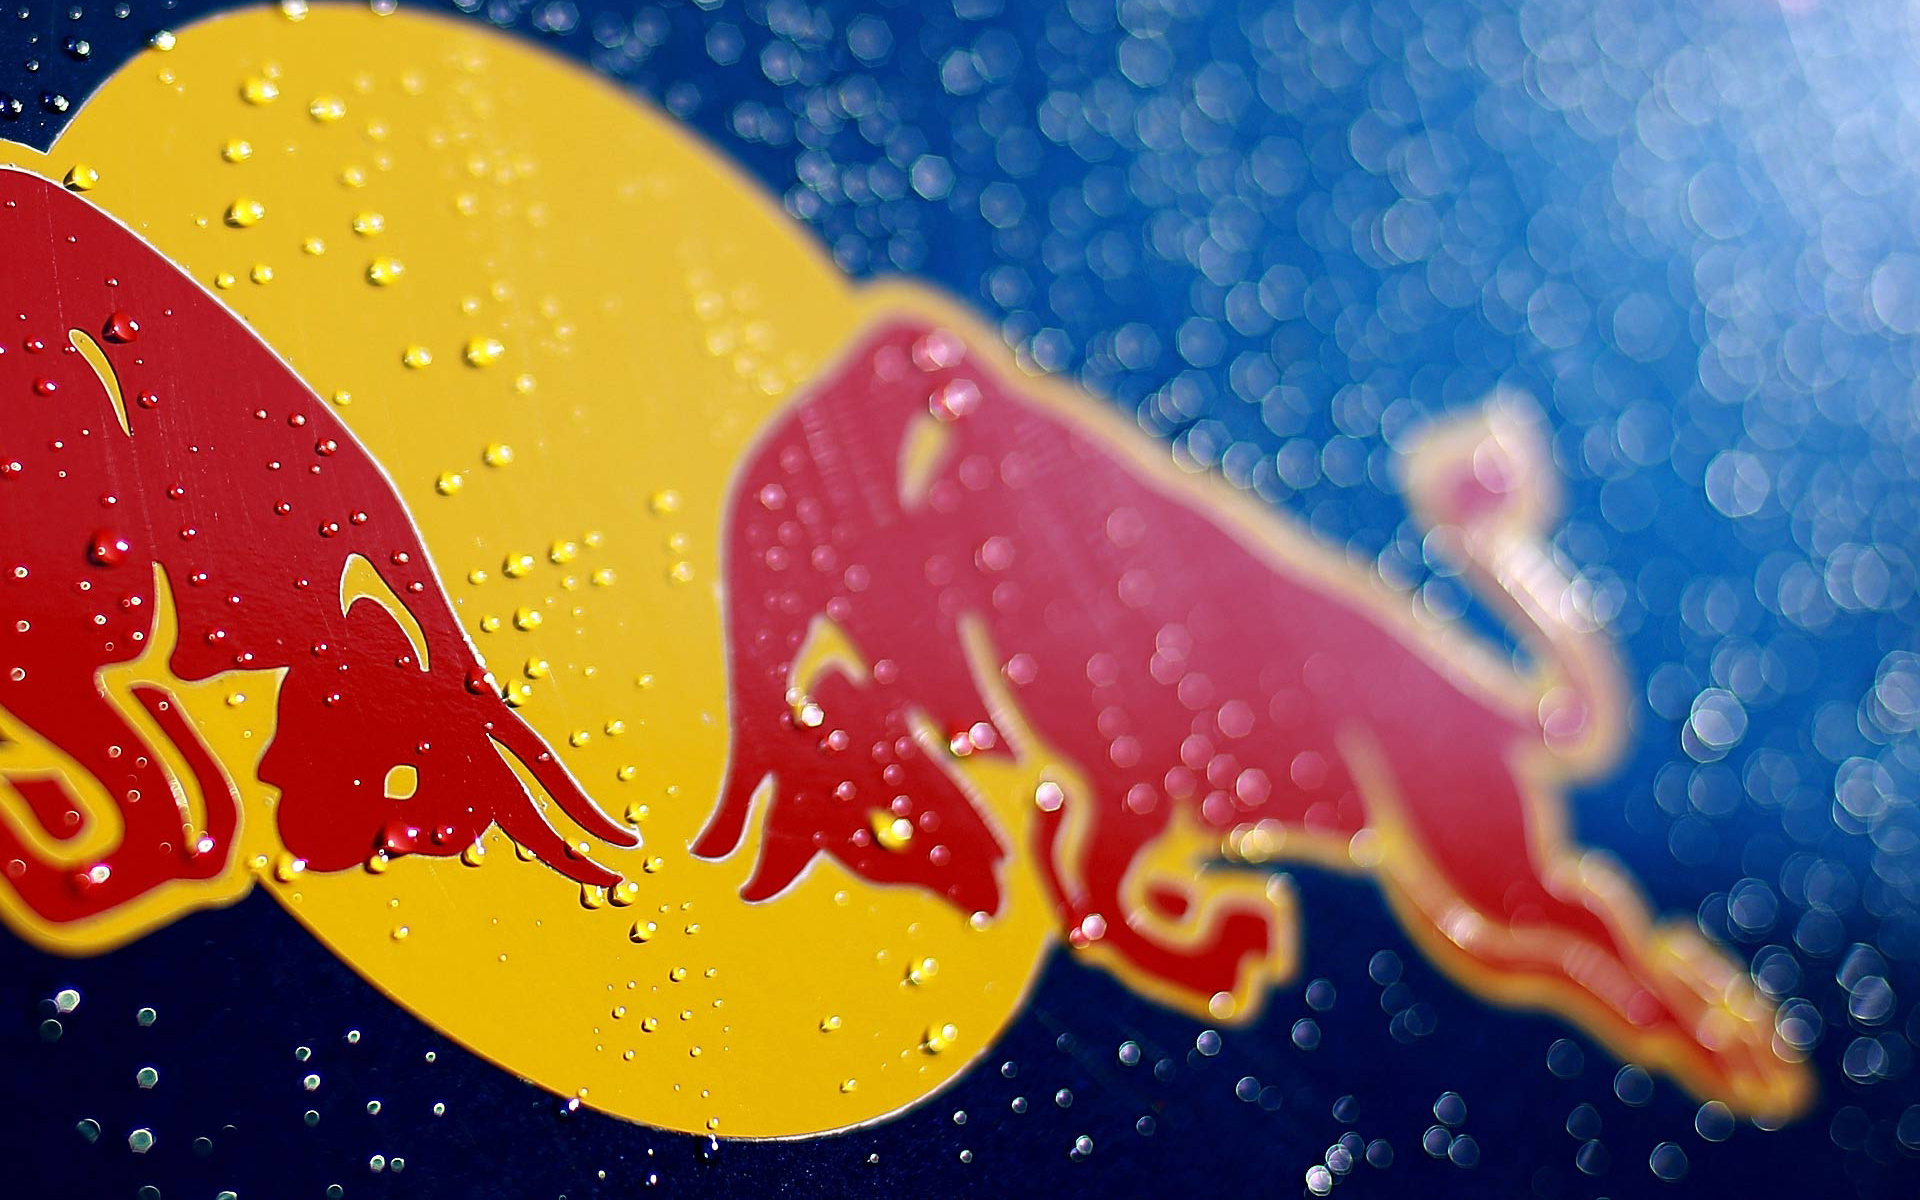 Red Bull Logo: A functional beverage providing wings whenever you need them, Taurine drink. 1920x1200 HD Wallpaper.